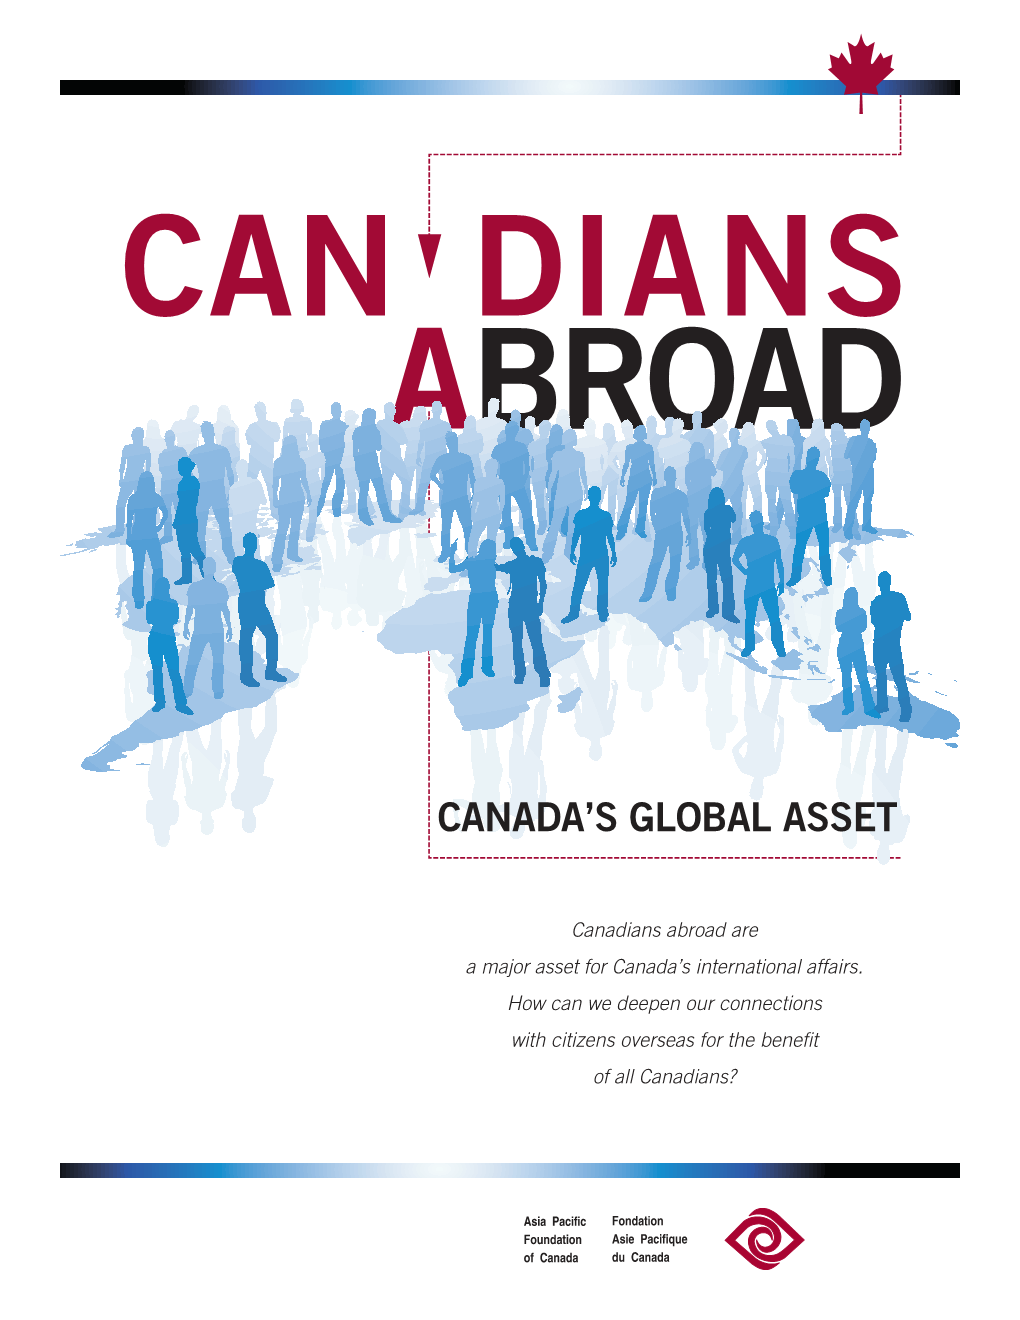 Canadians Abroad Are a Major Asset for Canada’S International Affairs